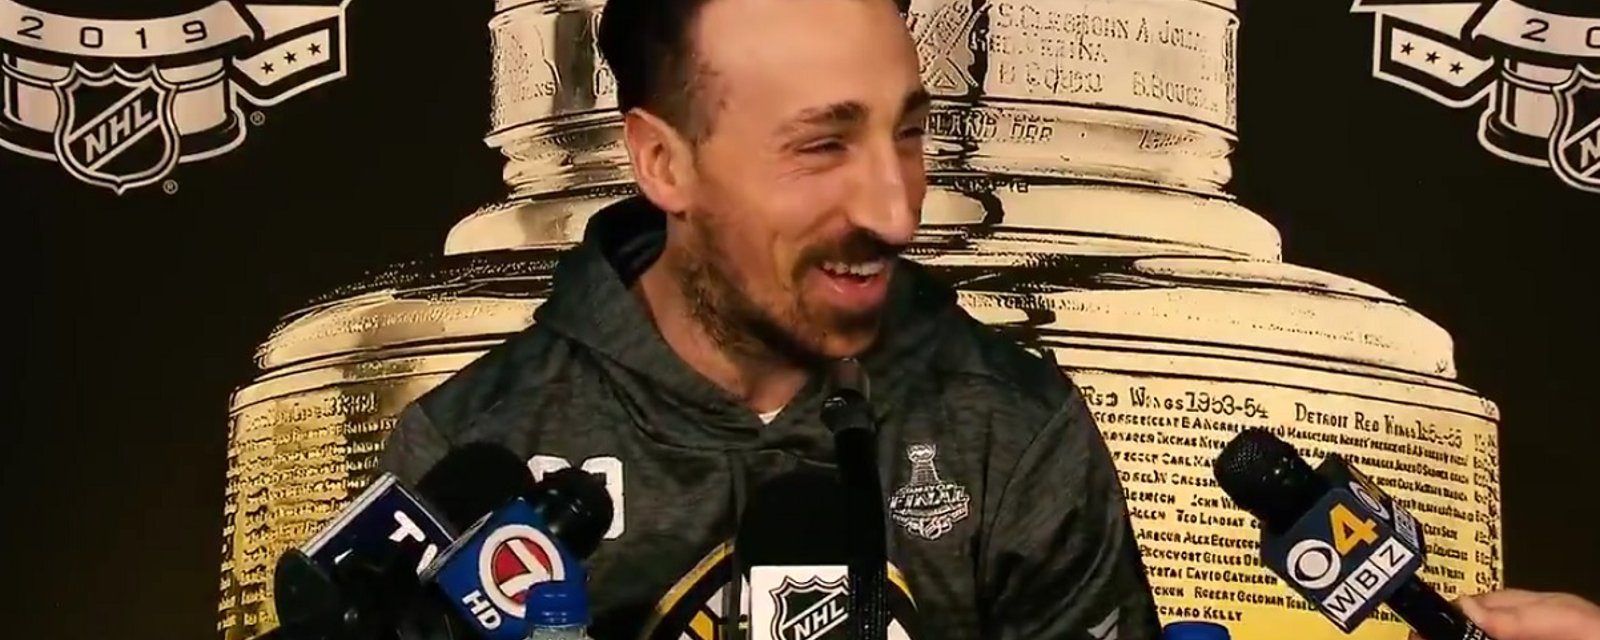 Marchand is asked to compare himself to a Game of Thrones character &amp;amp; gives the best response ever.